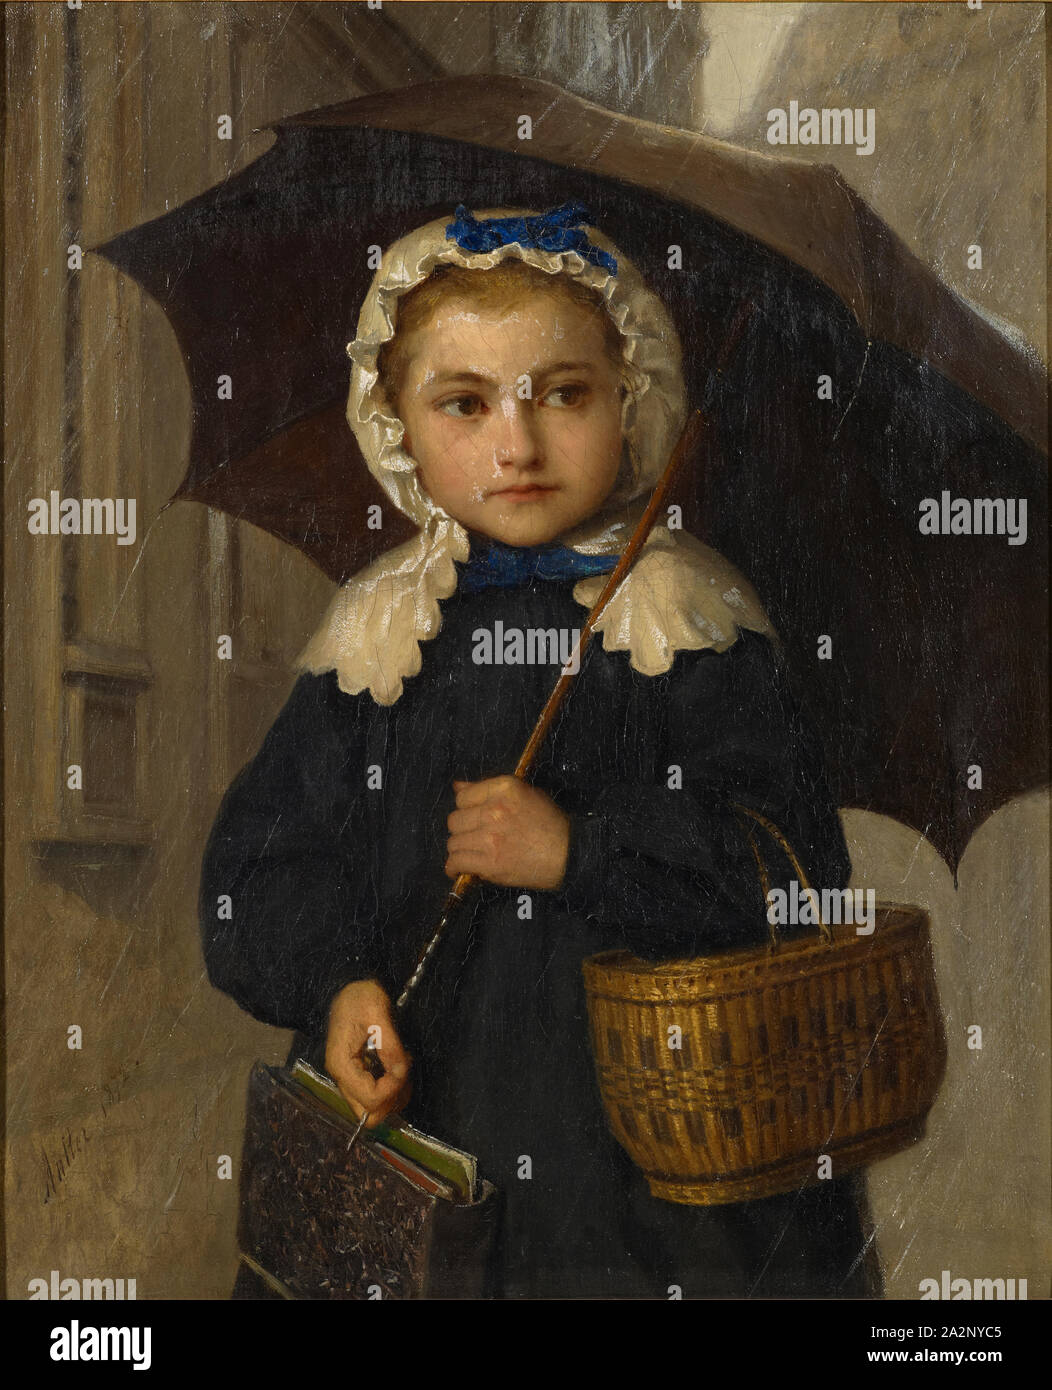 Louise Anker with Umbrella, 1872, oil on canvas, 43 x 36 cm |, 64 x 54 x 7  cm, signed and dated lower left: Anker 1872, Albert Anker, Ins/Bern  1831–1910 Ins/Bern Stock Photo - Alamy